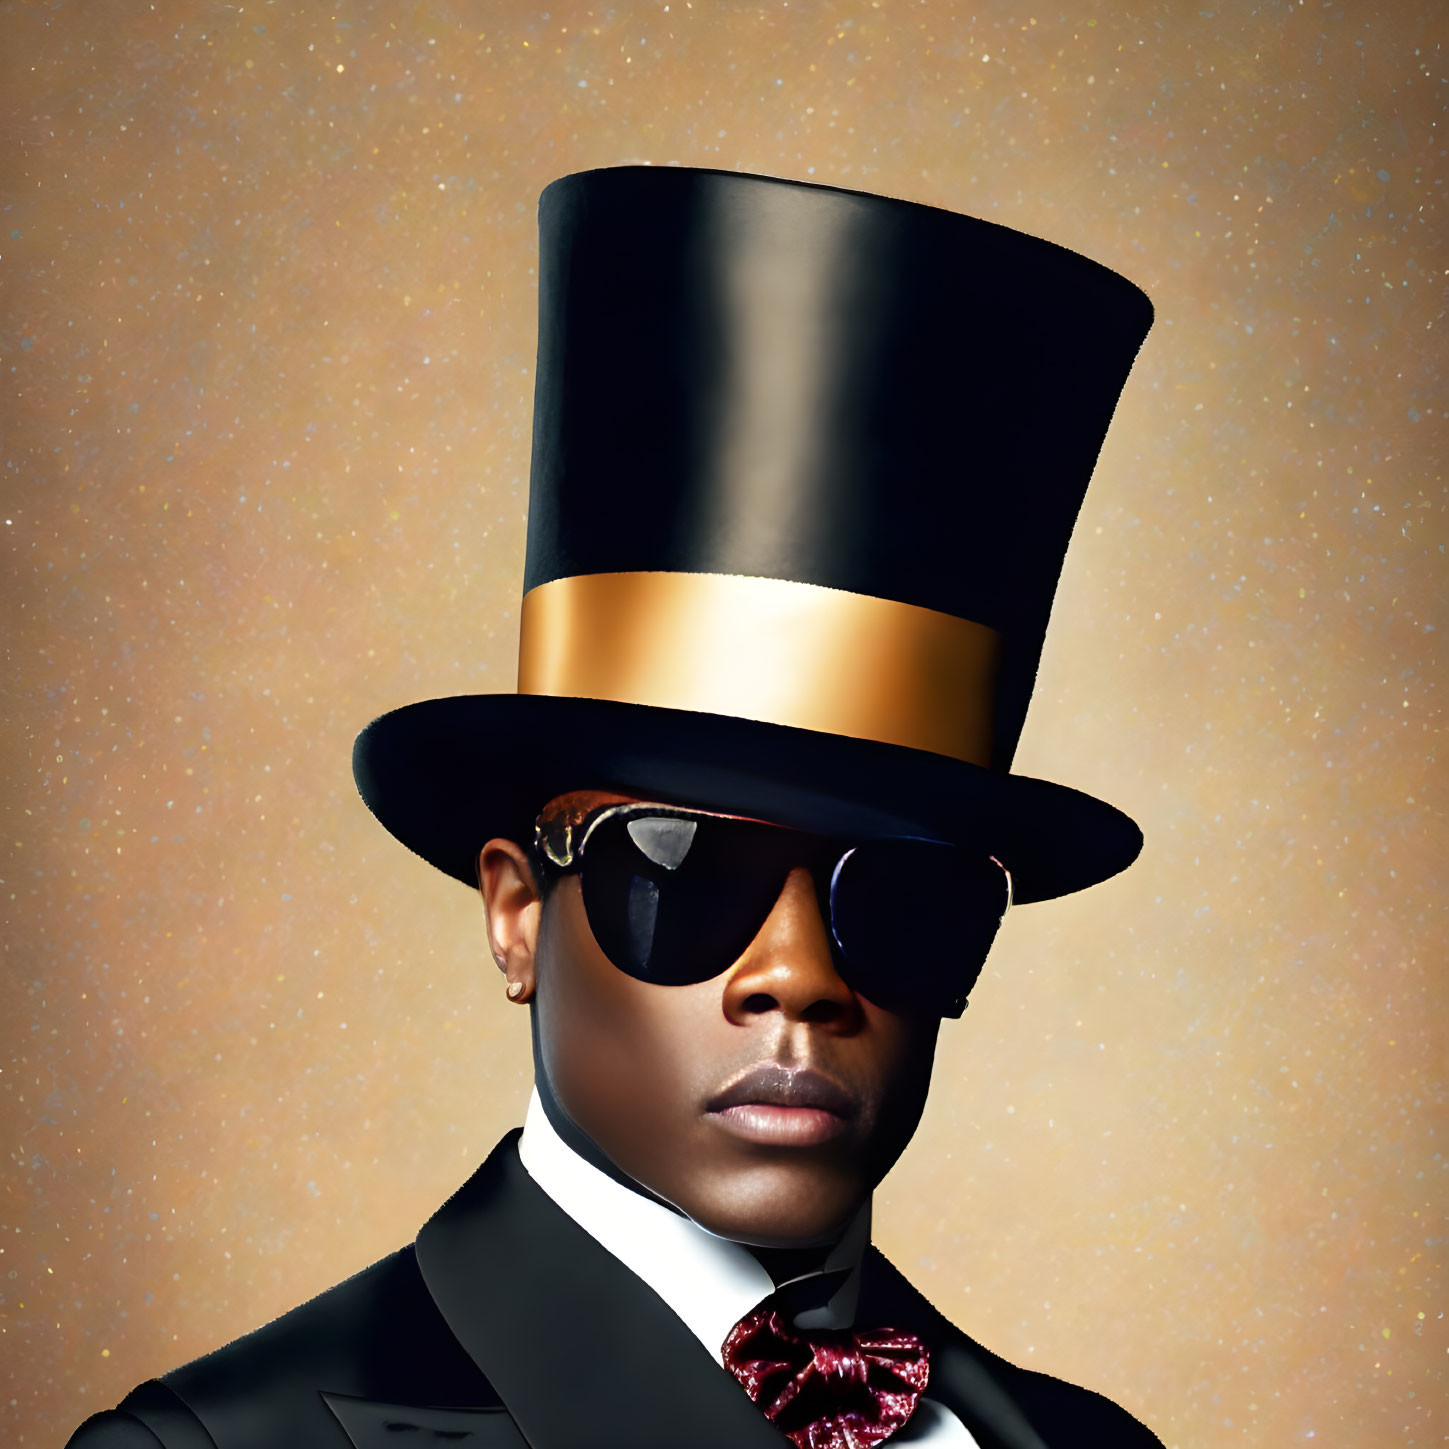 Person in Black Top Hat, Sunglasses, Suit, and Bow Tie on Tan Background